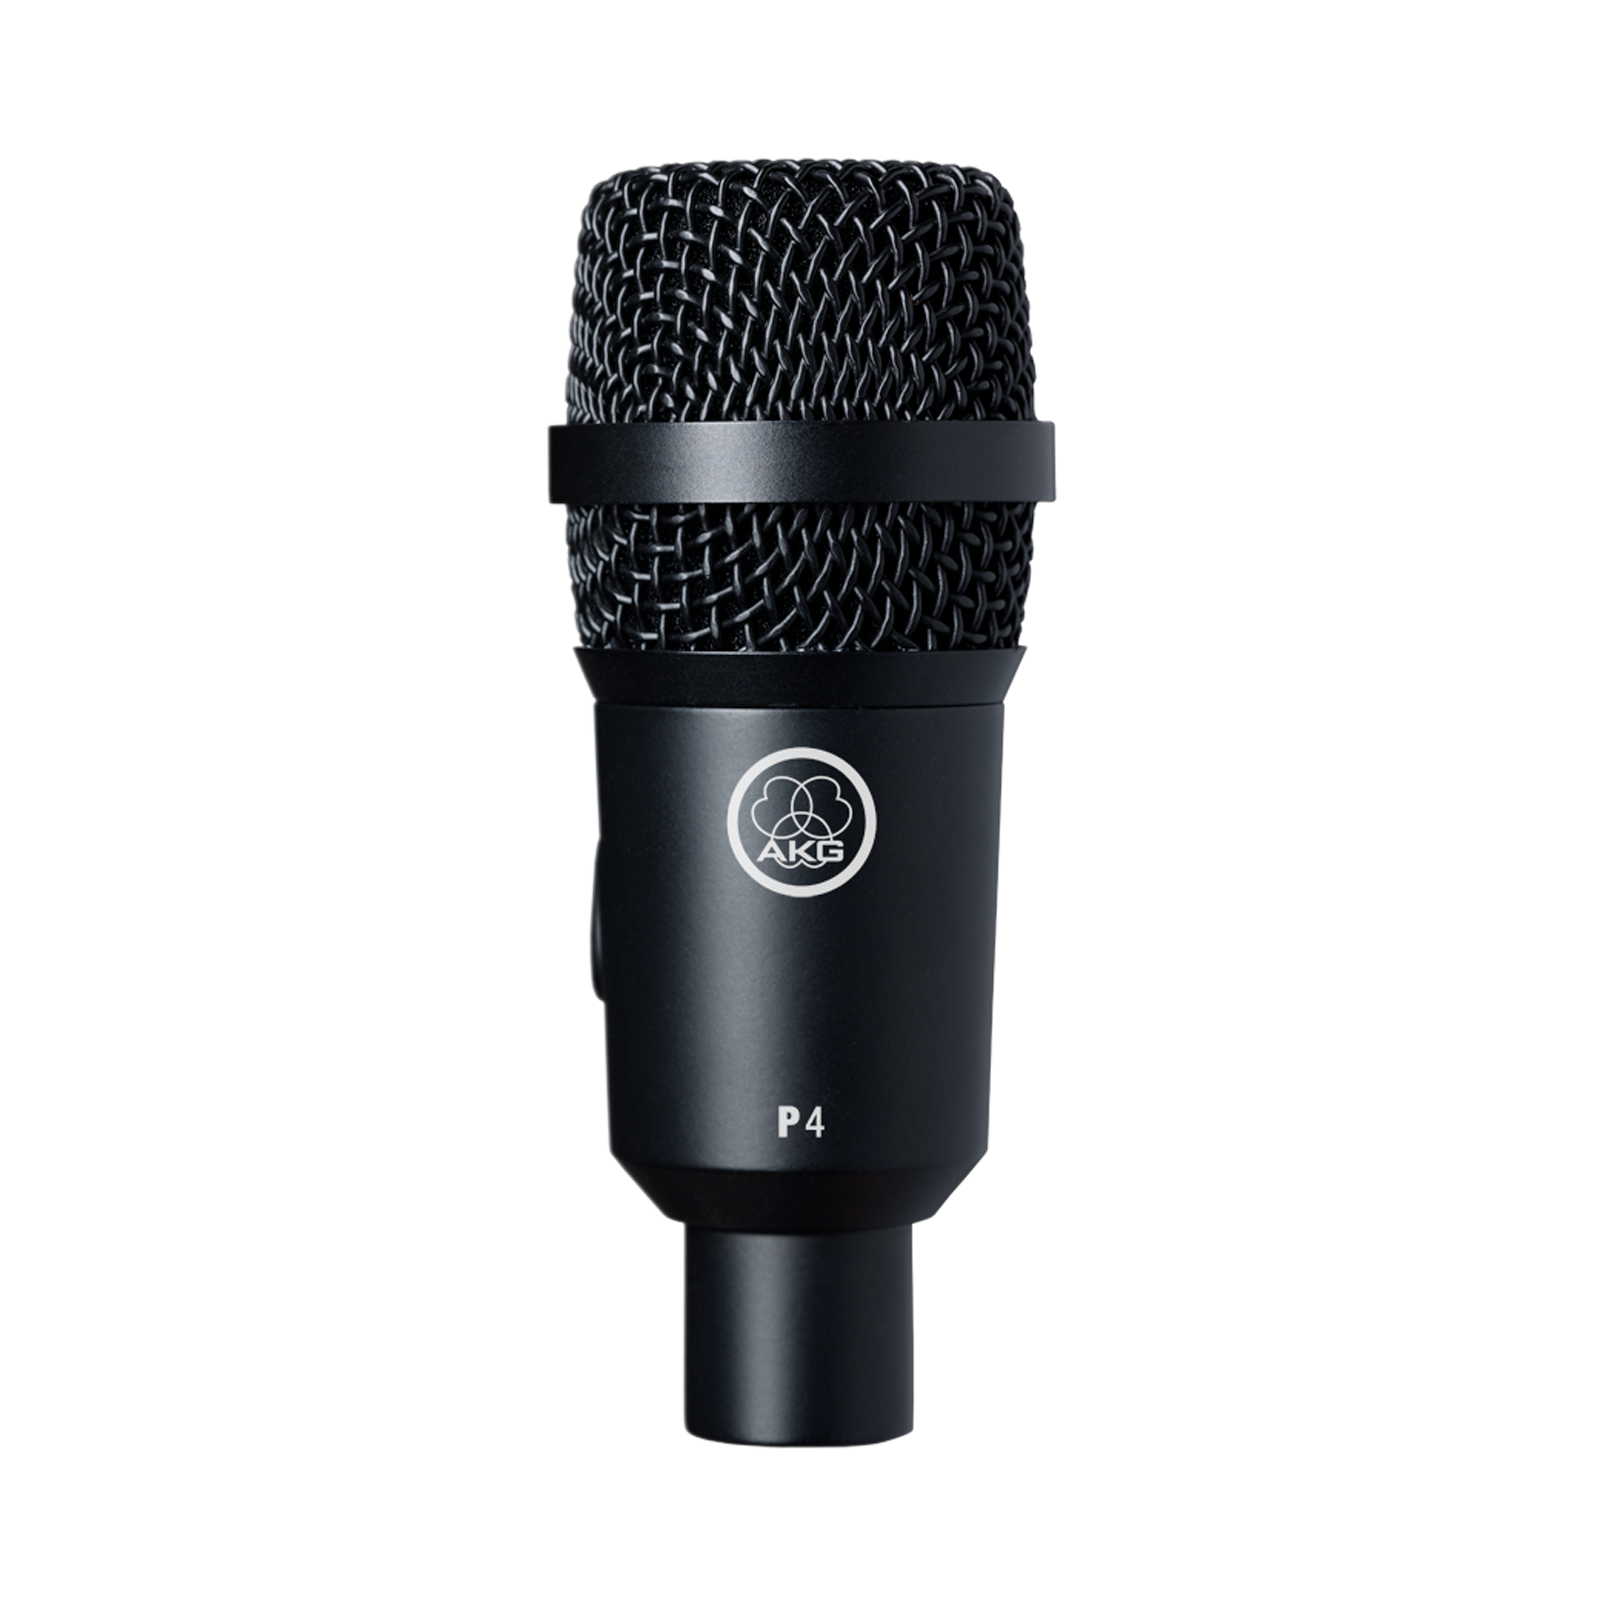 | High-performance dynamic instrument microphone